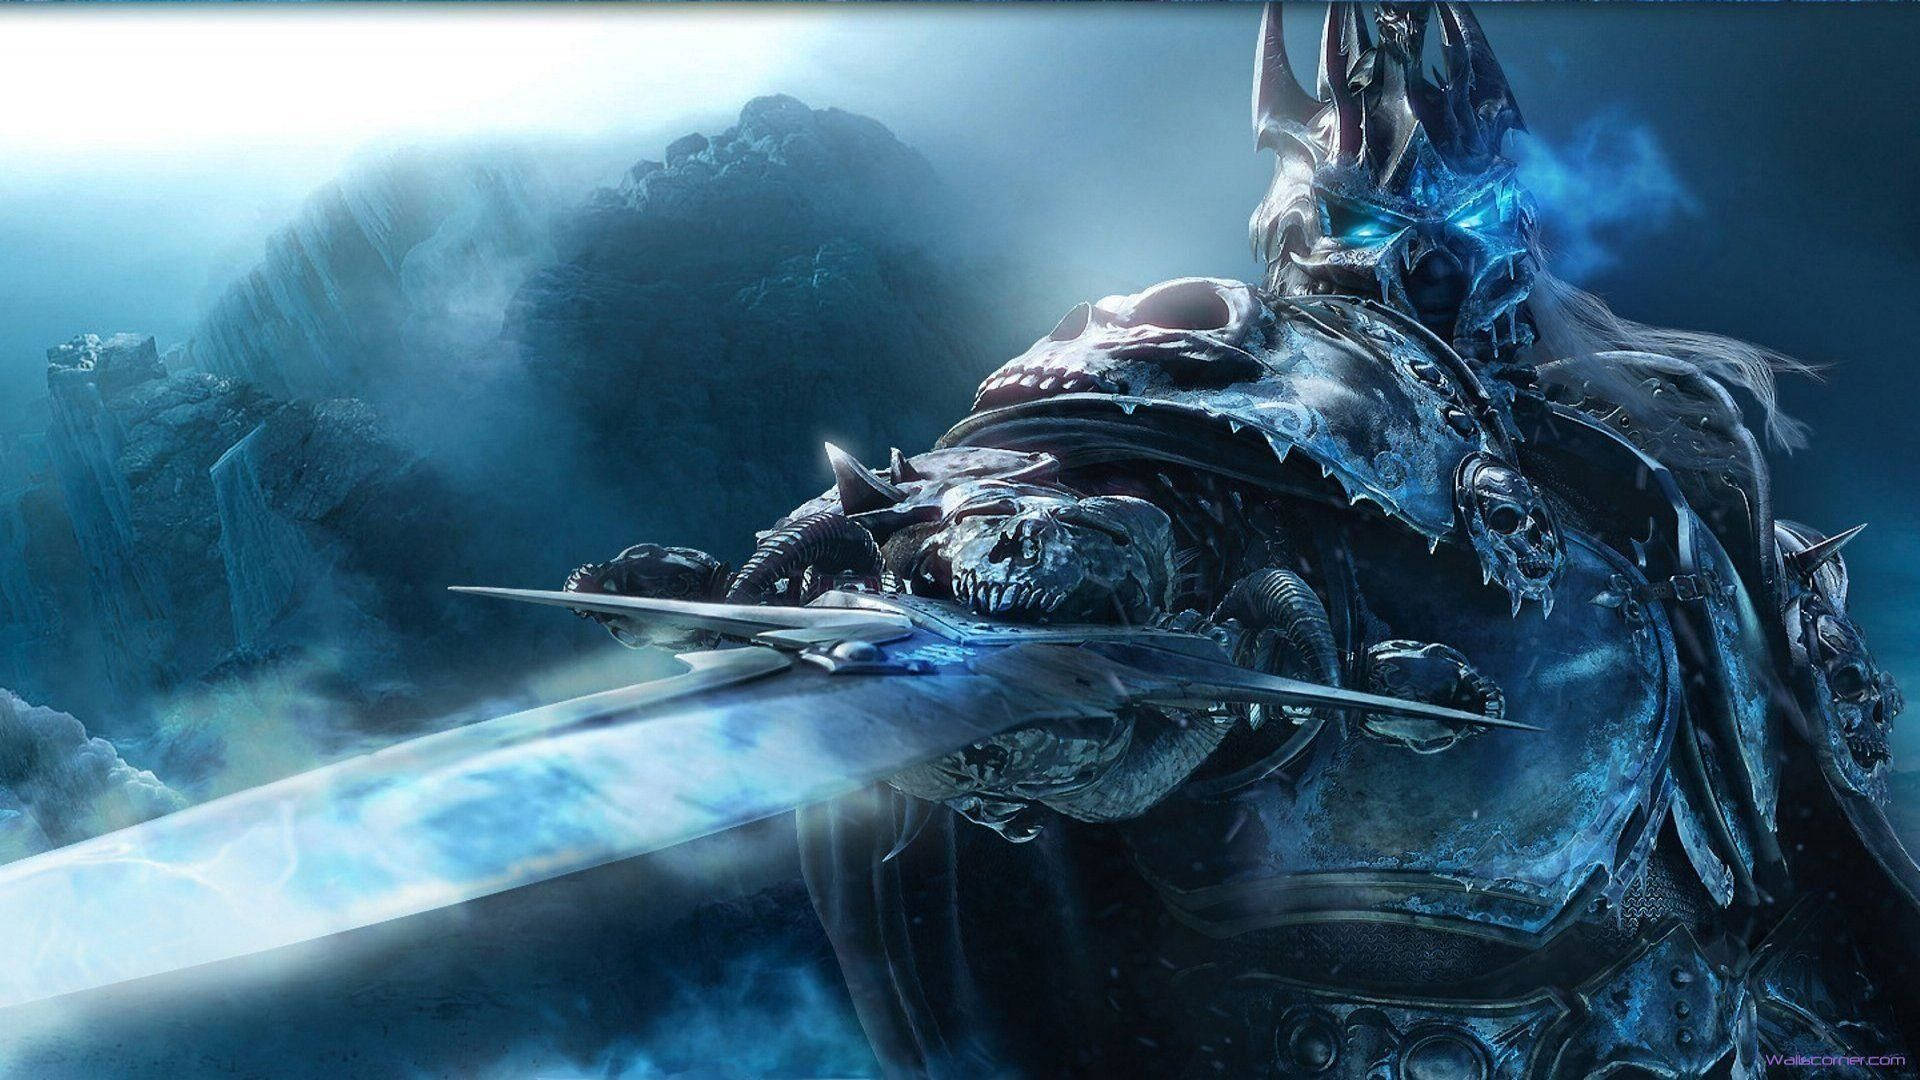 Caption: The Powerful Lich King, Ruler Of The Frozen Throne Wallpaper